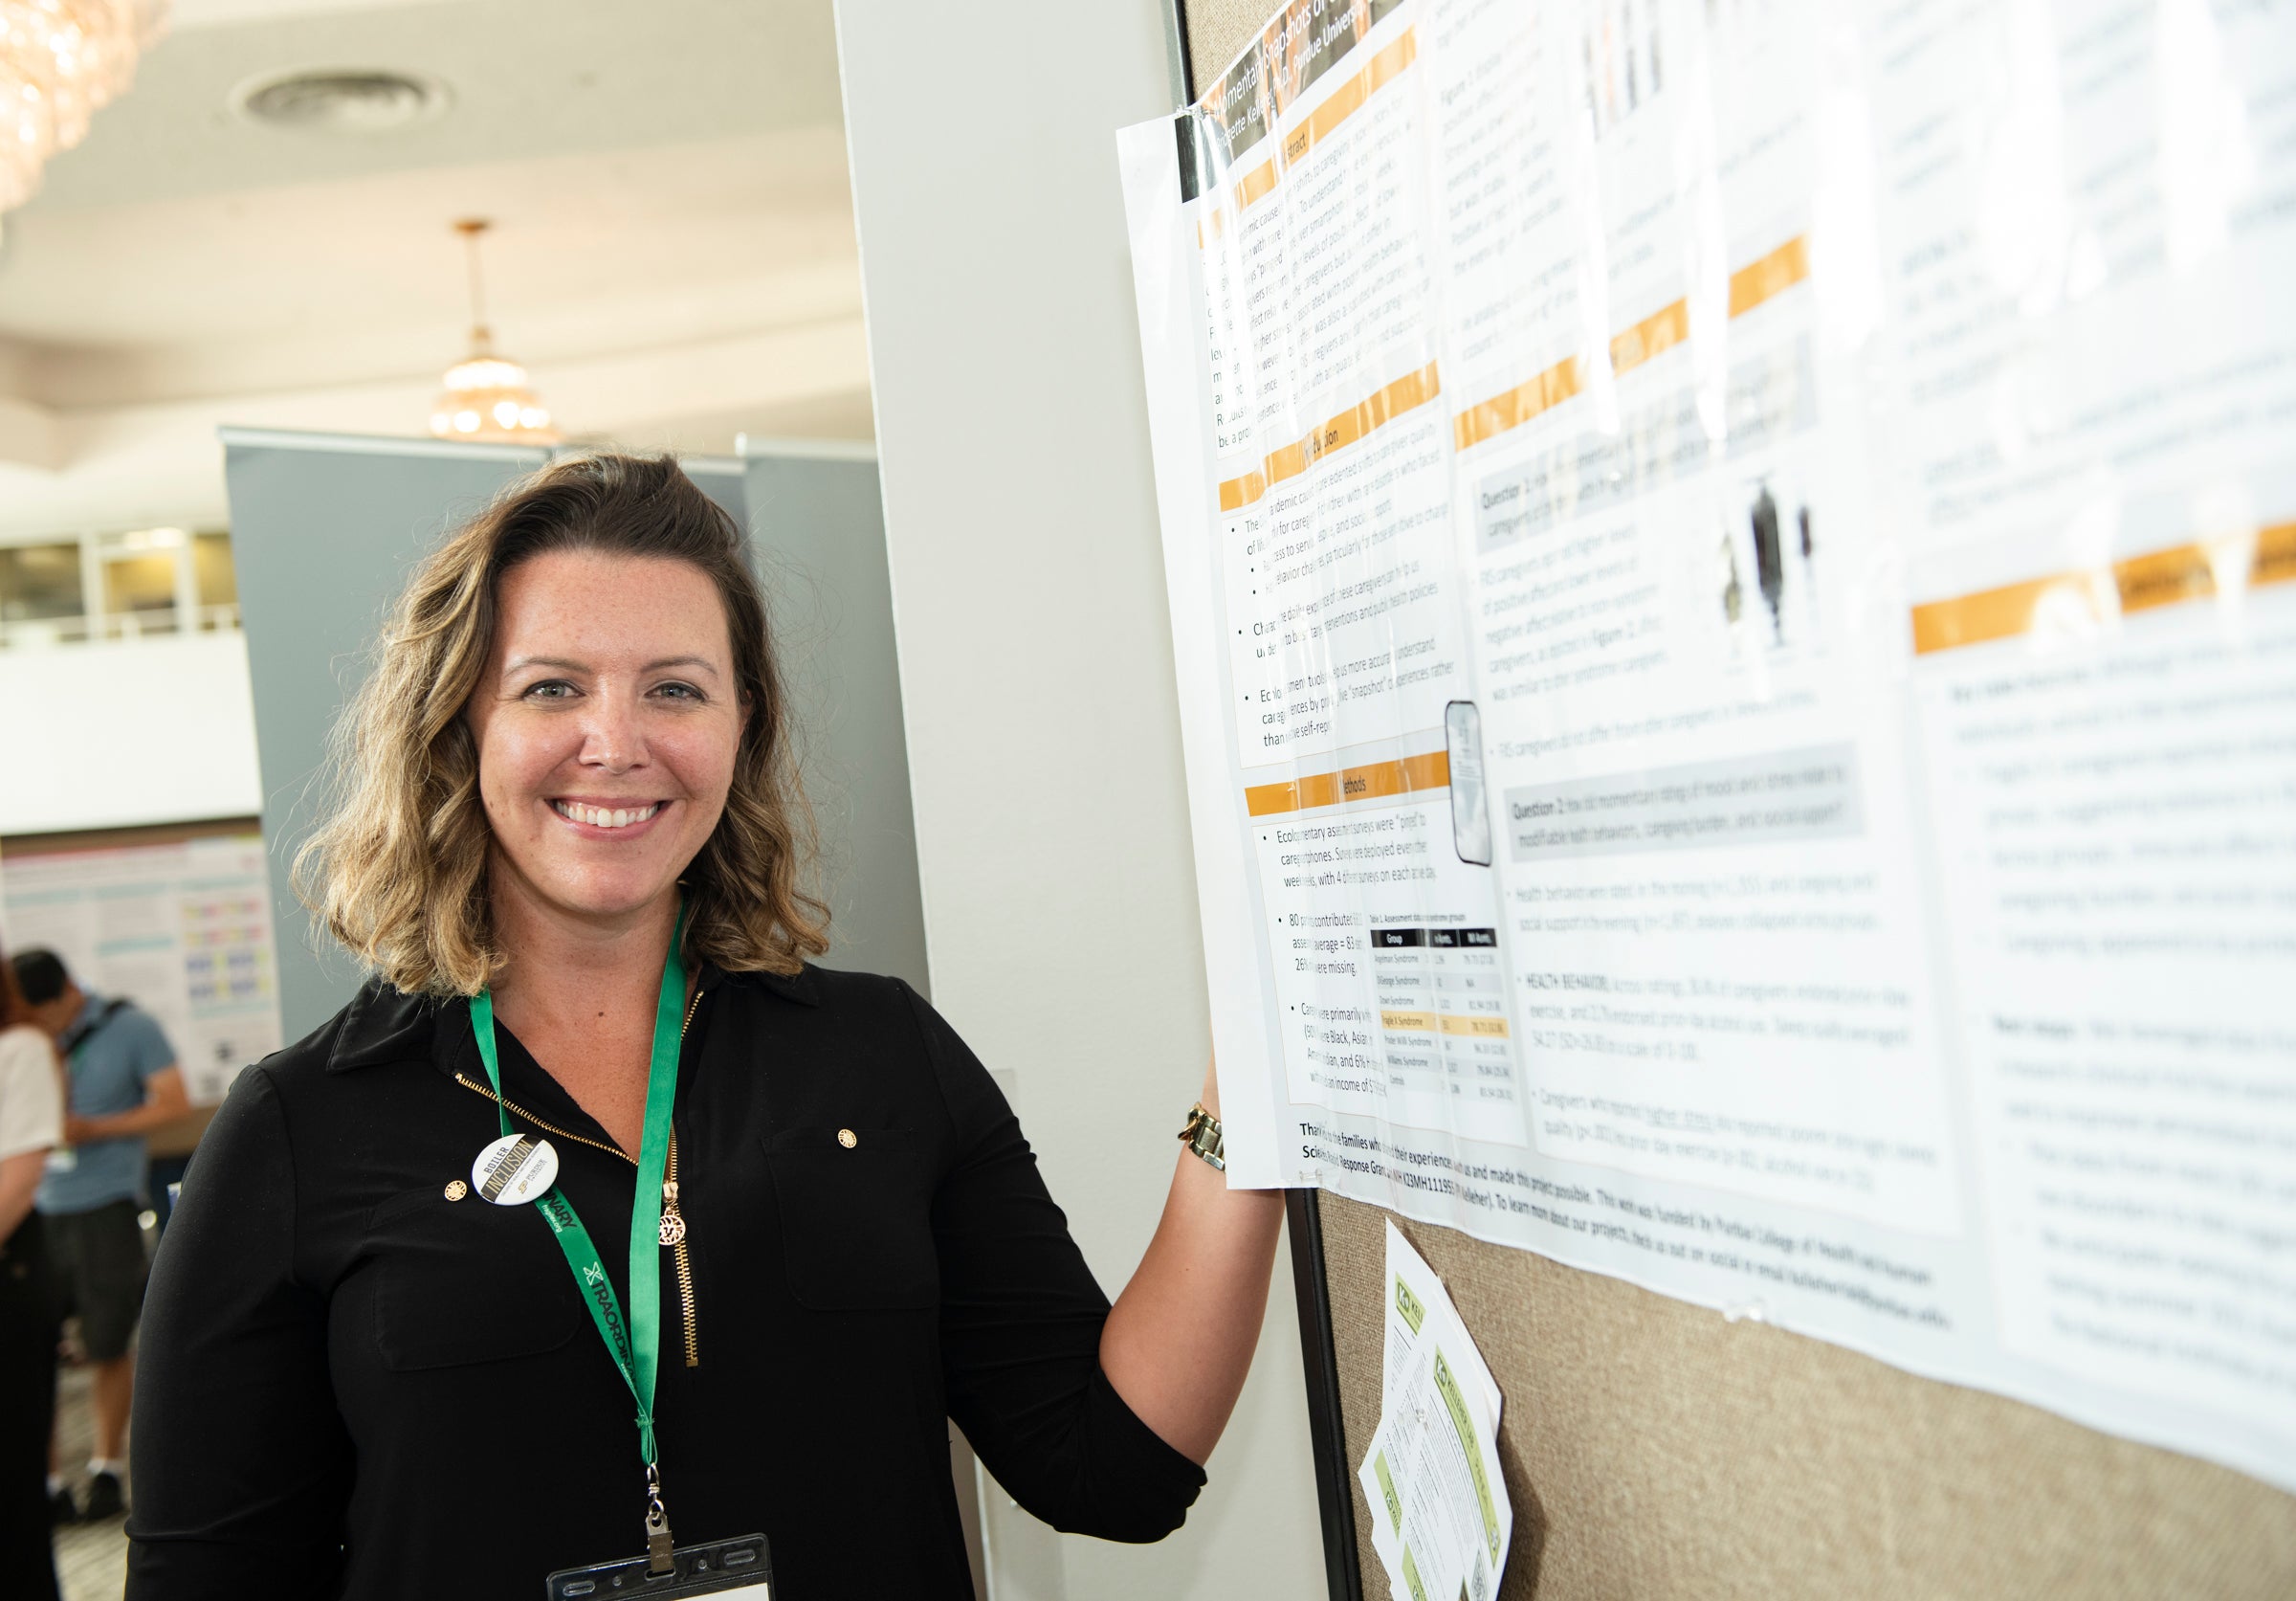 A researcher presenting her poster at conference